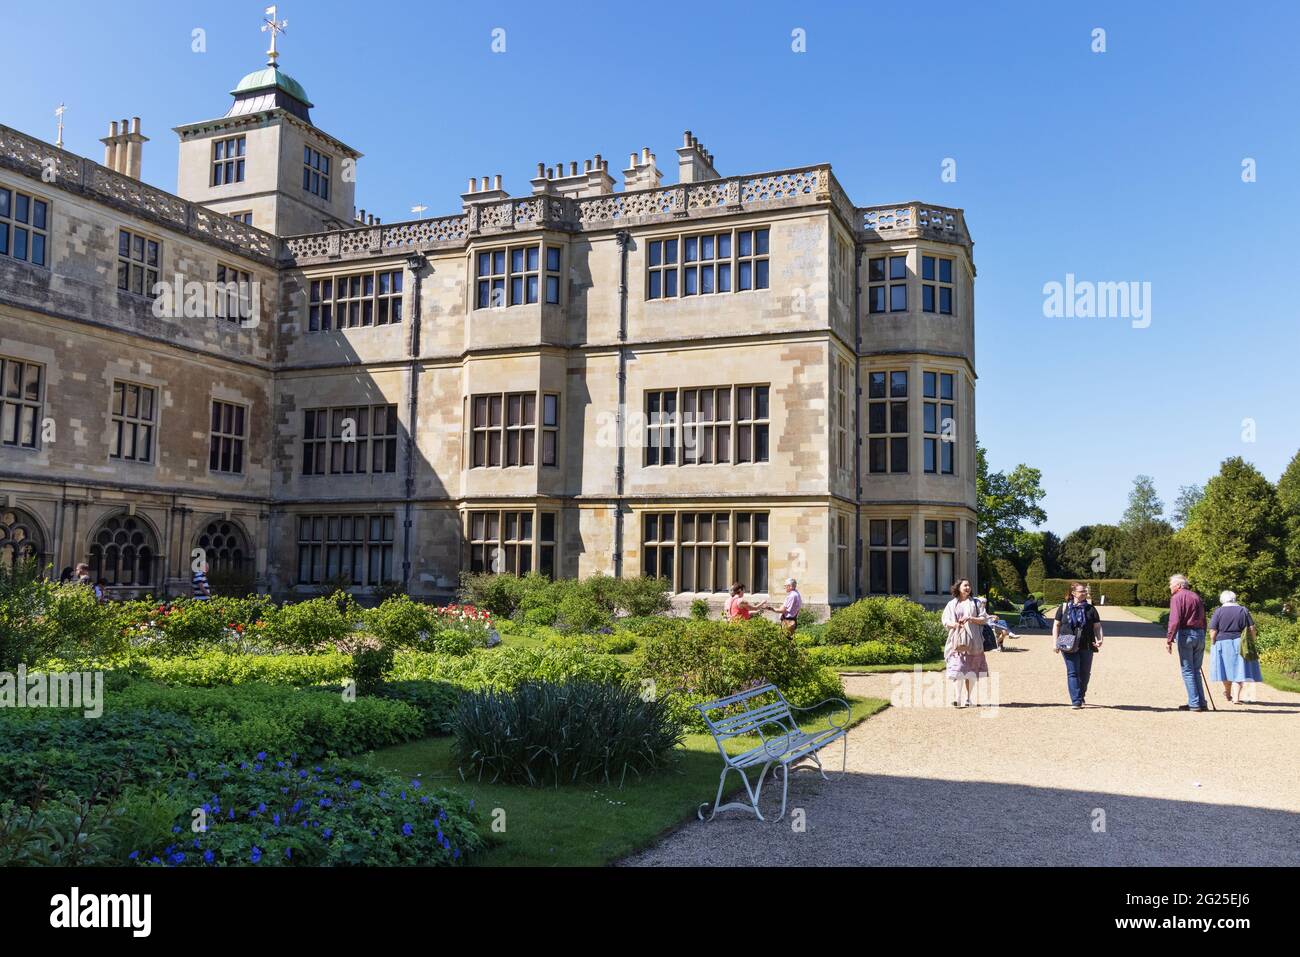 Audley End; people enjoying the 17th century Jacobean Audley End House and Gardens, owned by English Heritage, Audley End, Cambridgeshire UK Stock Photo